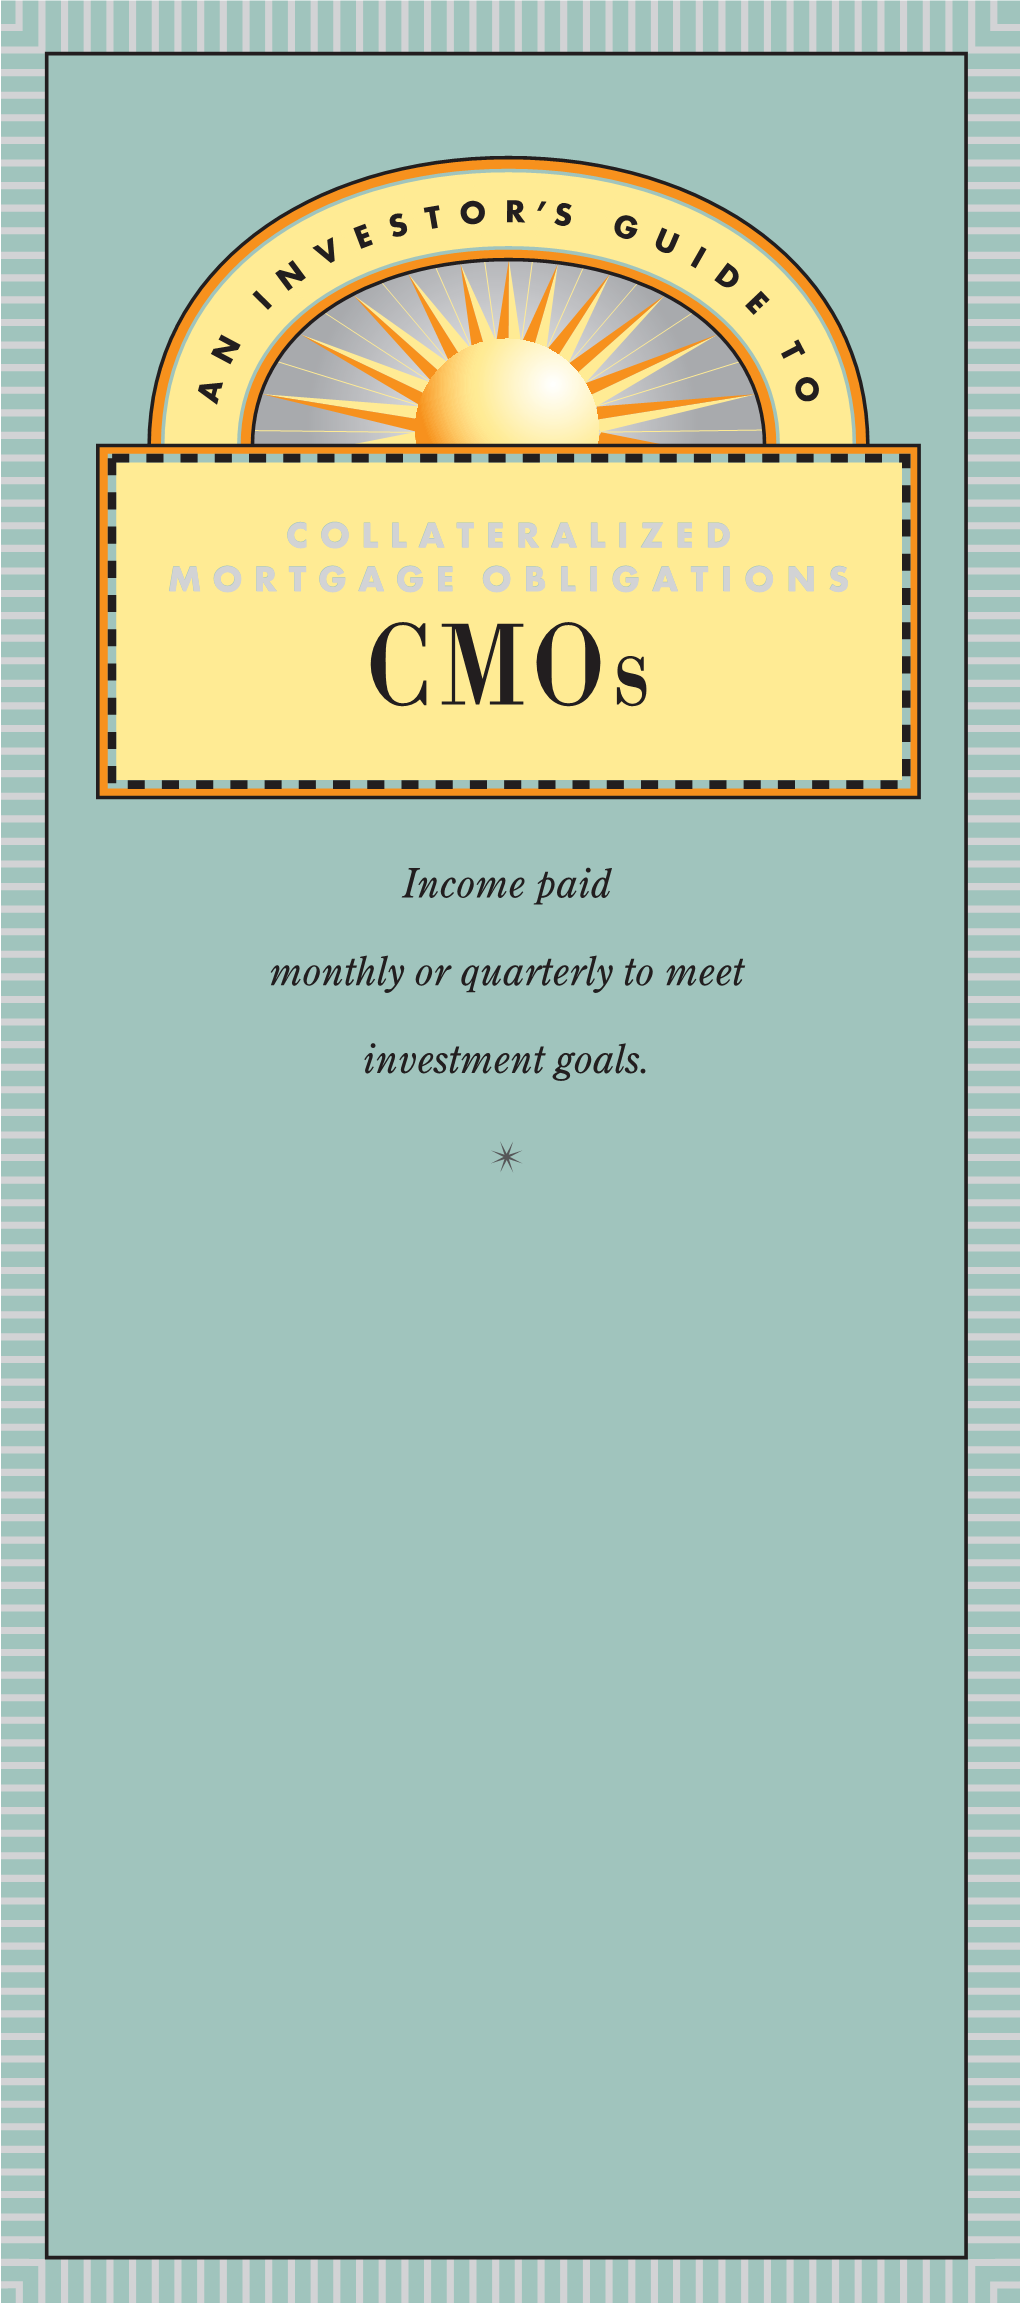 Investors Guide to Cmos